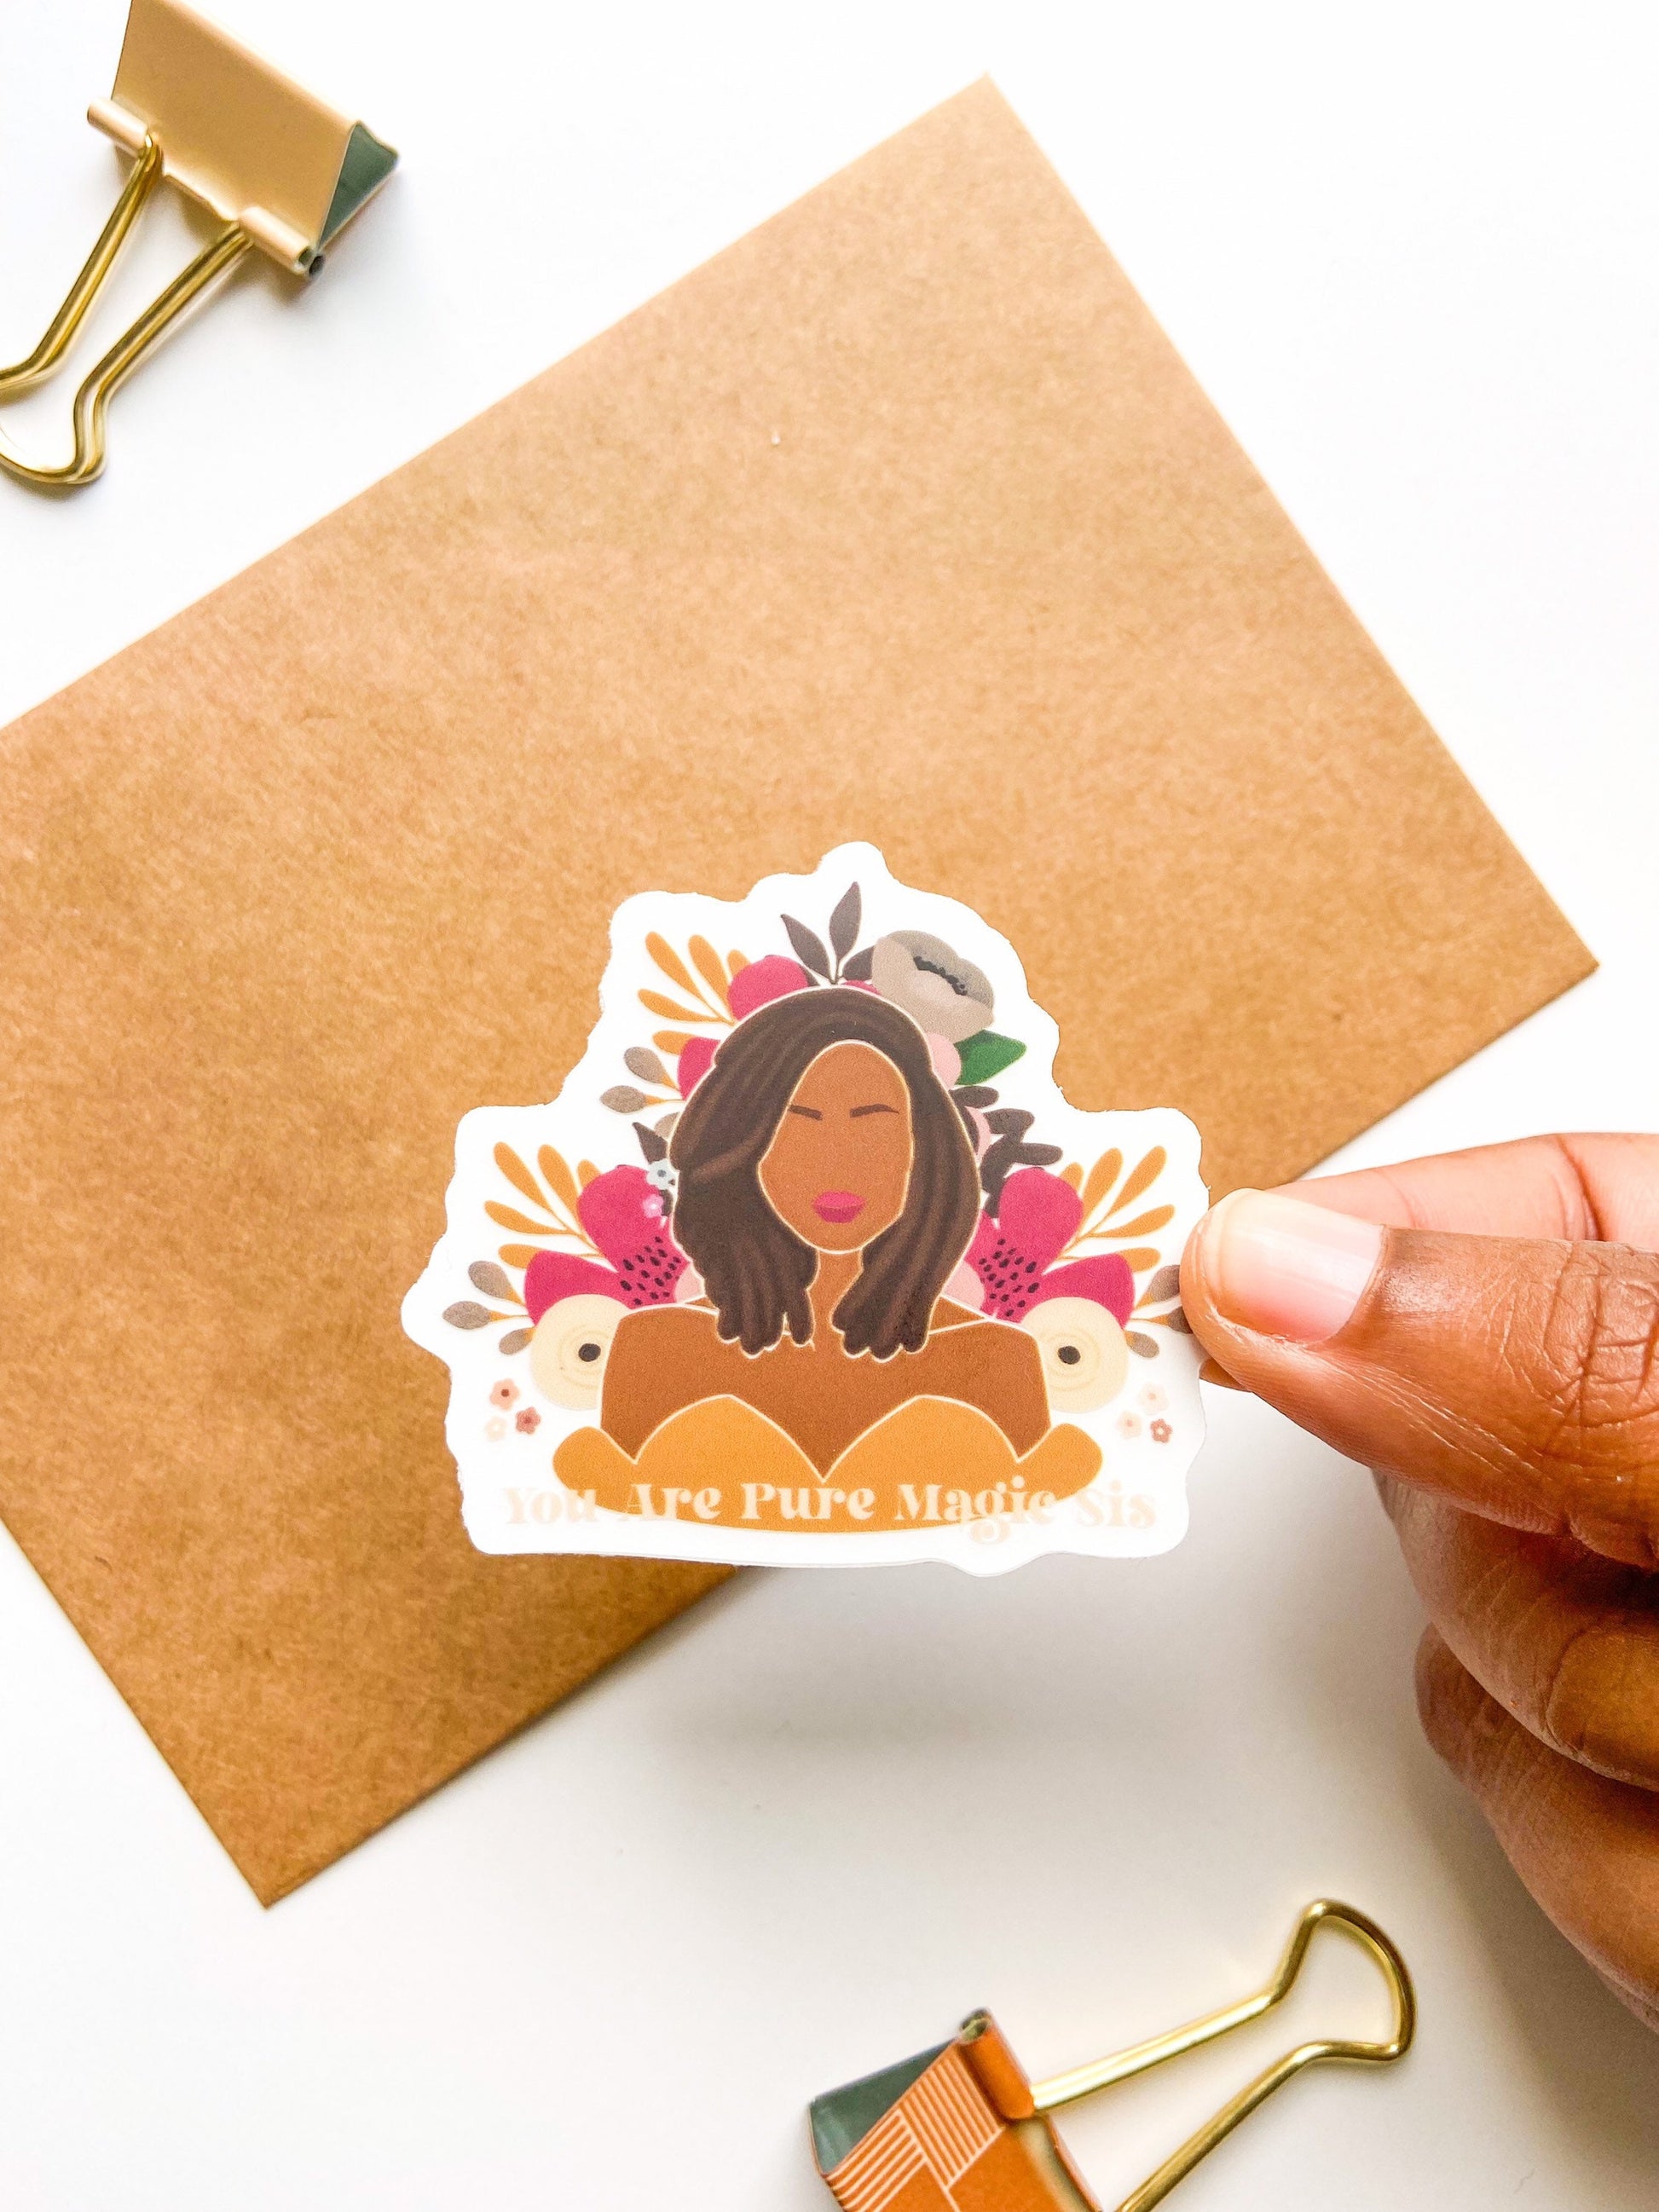 Girl With Locs Sticker, Floral Locs Girl Sticker, Pure Magic Sticker, Cute Black Girl Sticker, Black Girl Stickers, Transparent Stickers